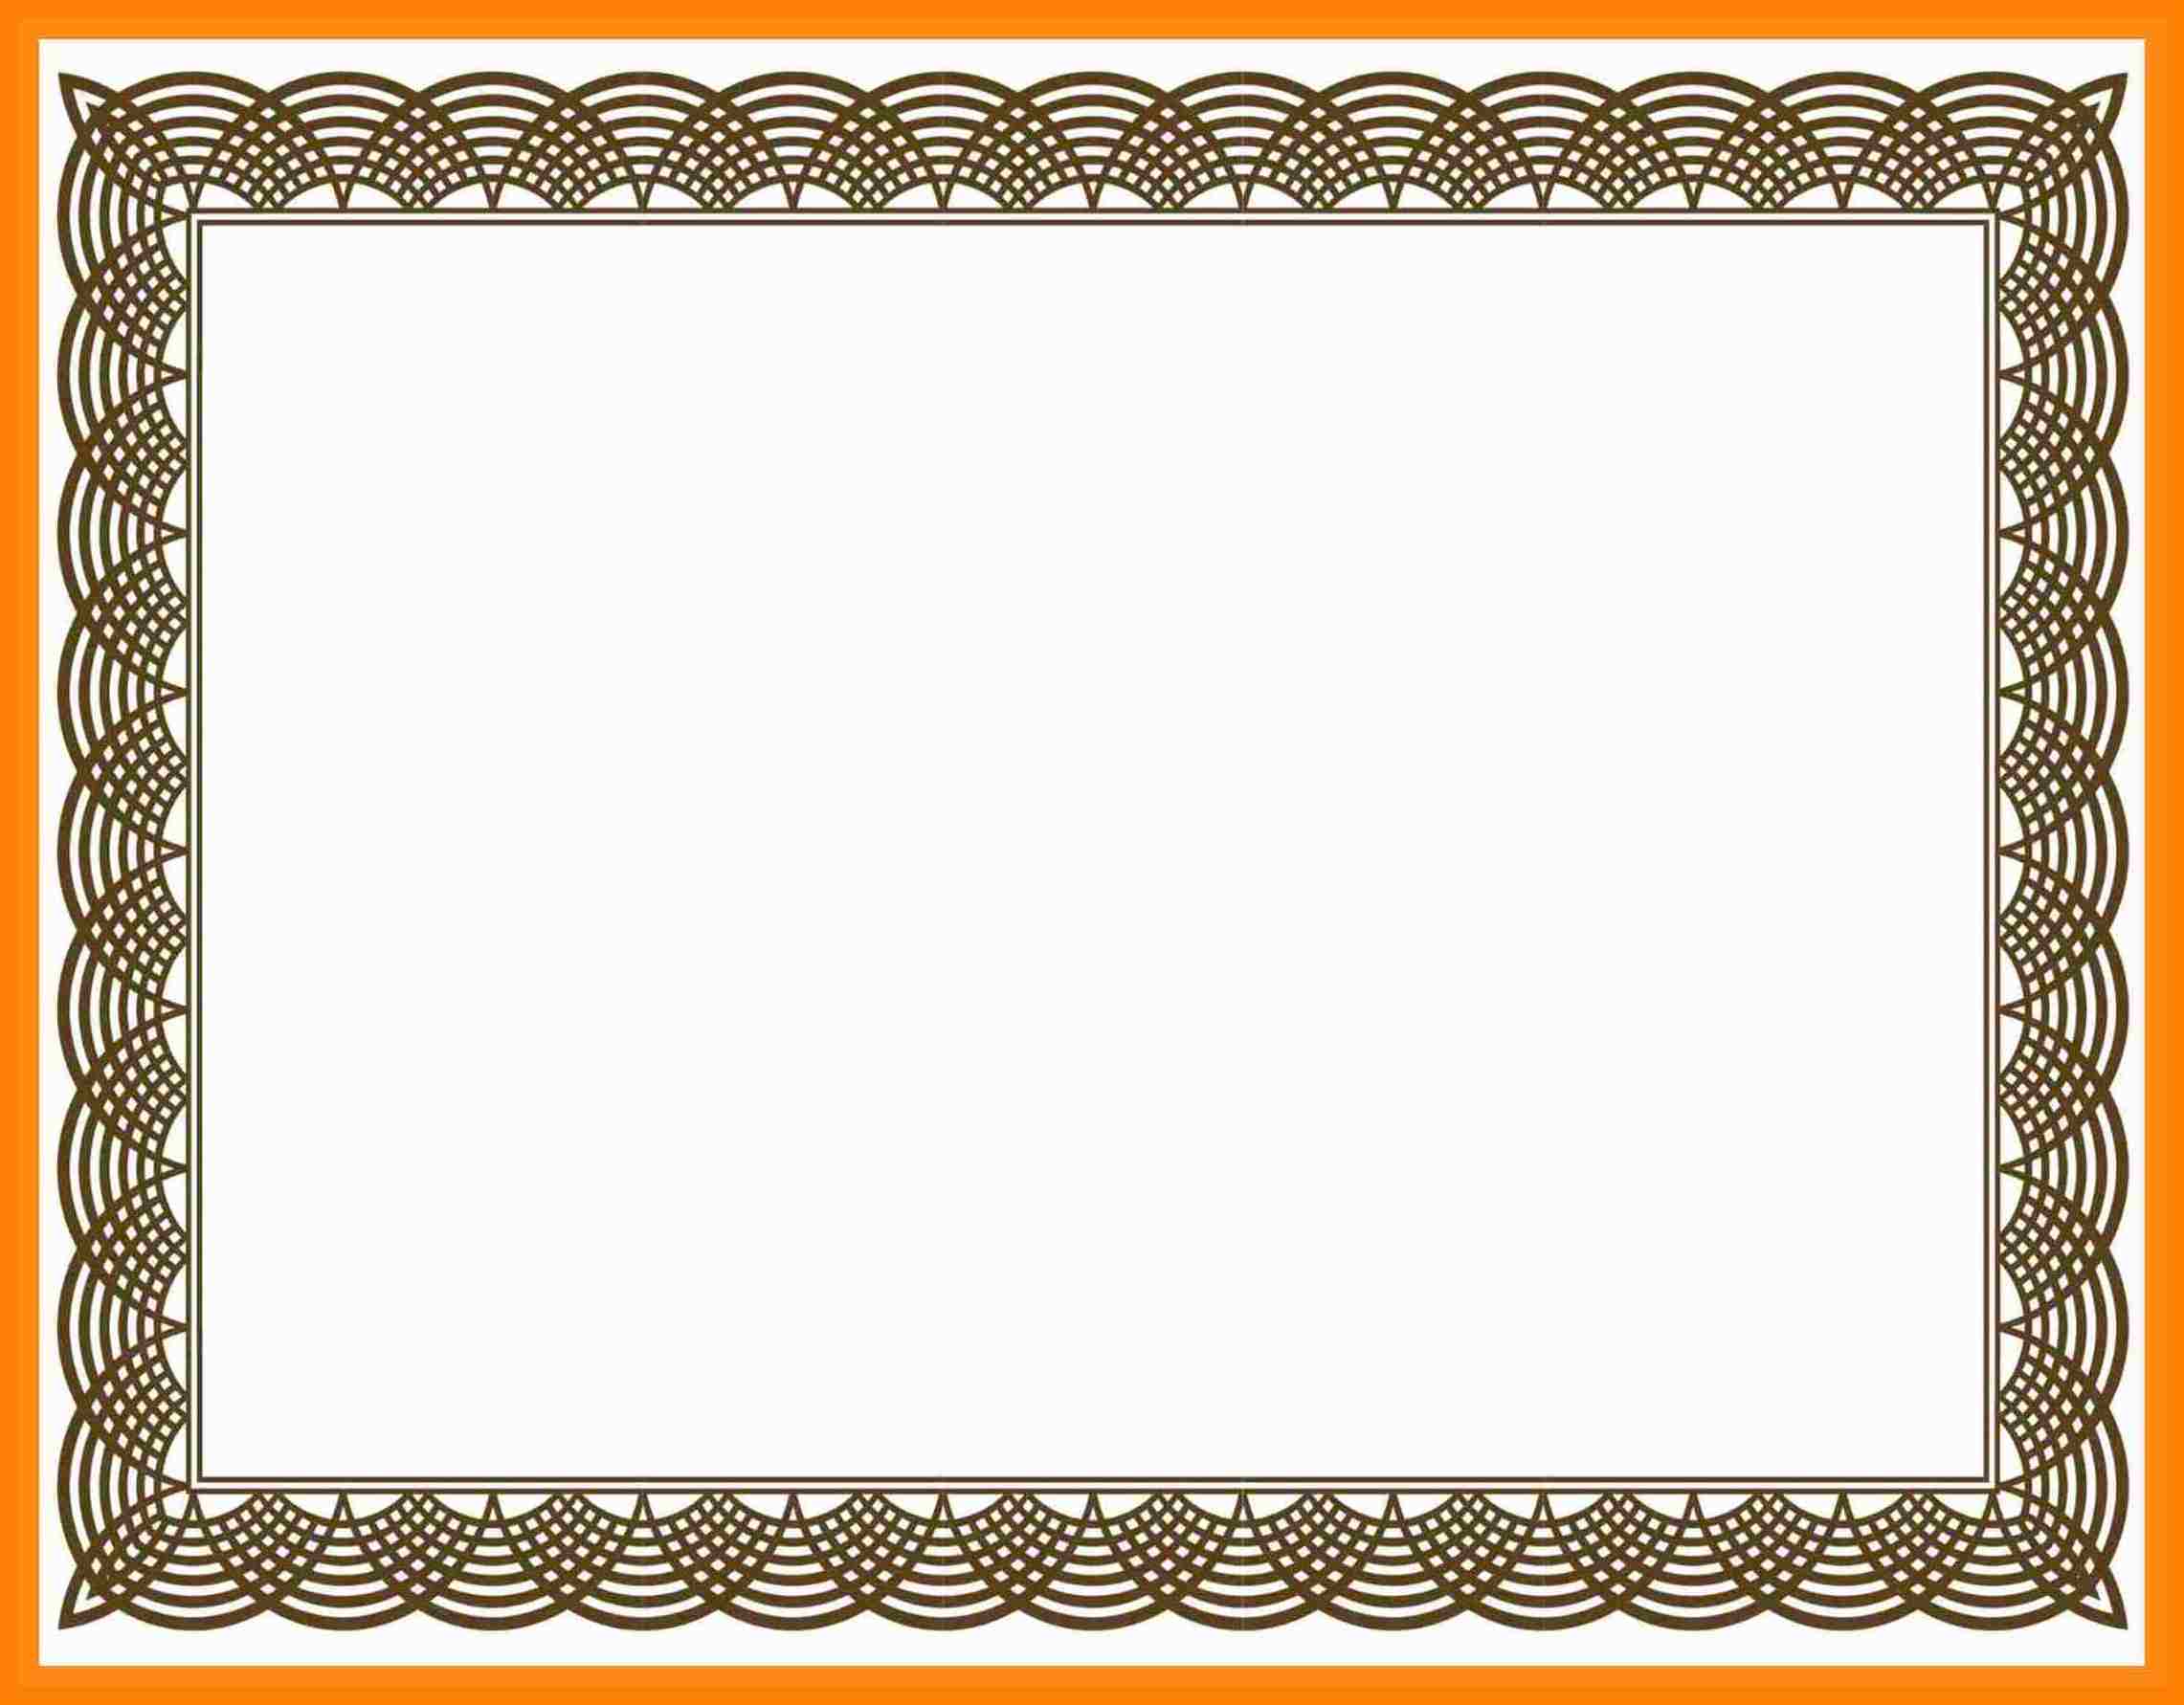 free template with borders to download for word documents